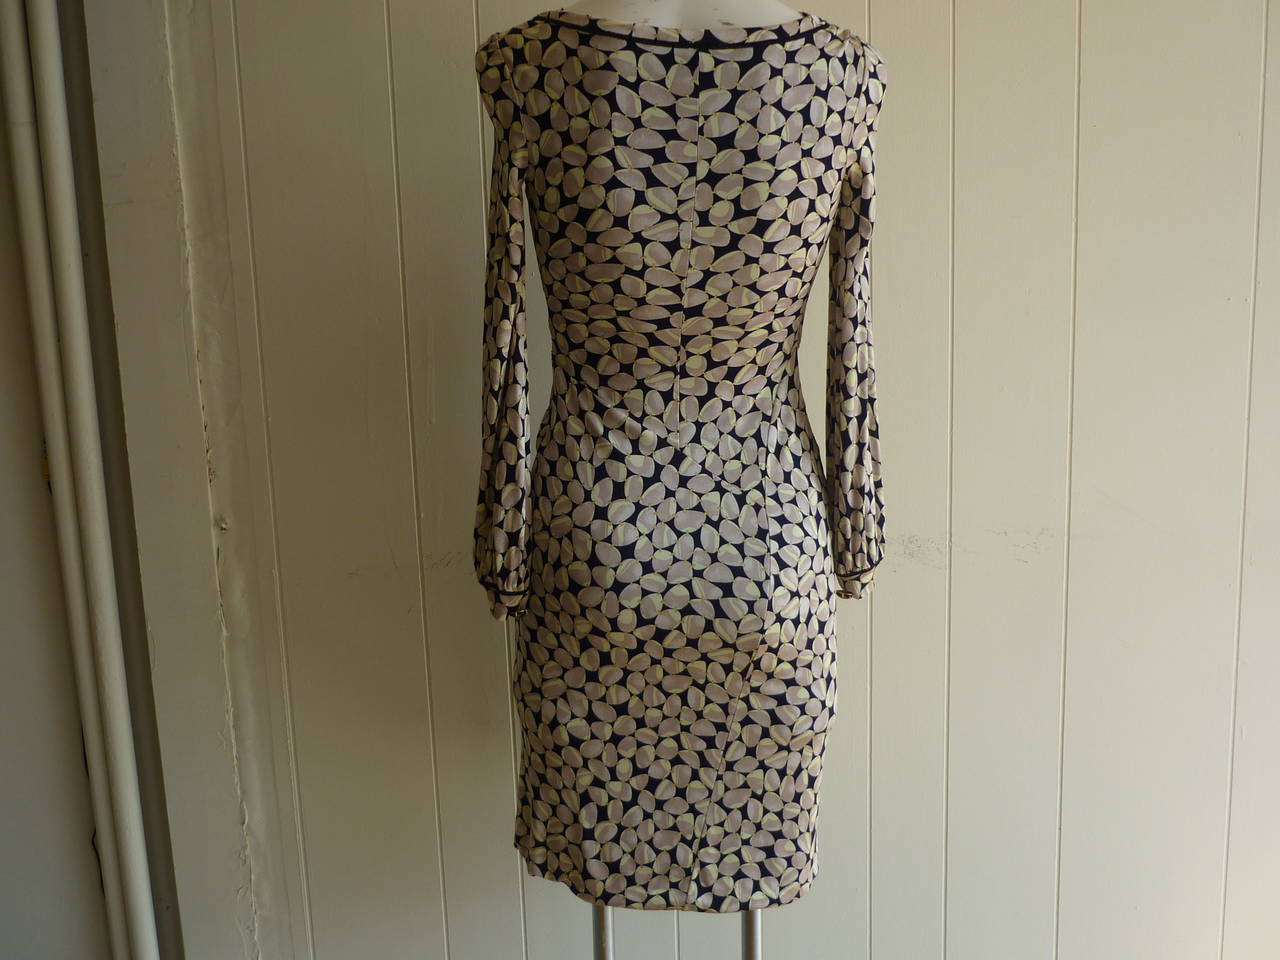 Delightful viscose dress with a silk lining in a button/cabochon design print. The neckline is slightly draped and the waistline gathered.

There is a black zig zag detail around the neckline as well as the cuffs which are adorned with beautiful